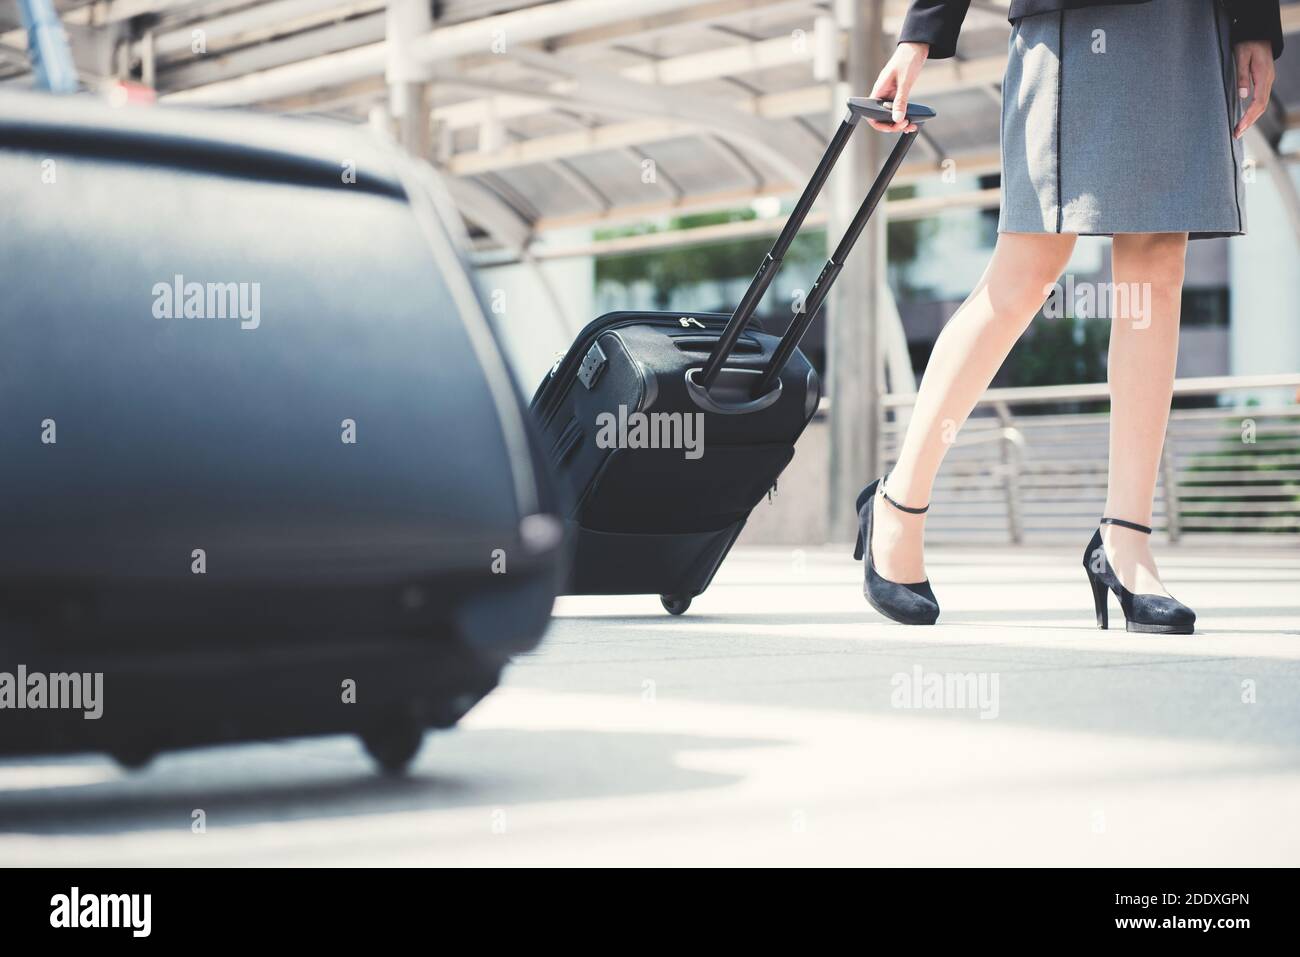 Businesswoman (lower part) walking and pulling luggage - business traveling concept Stock Photo